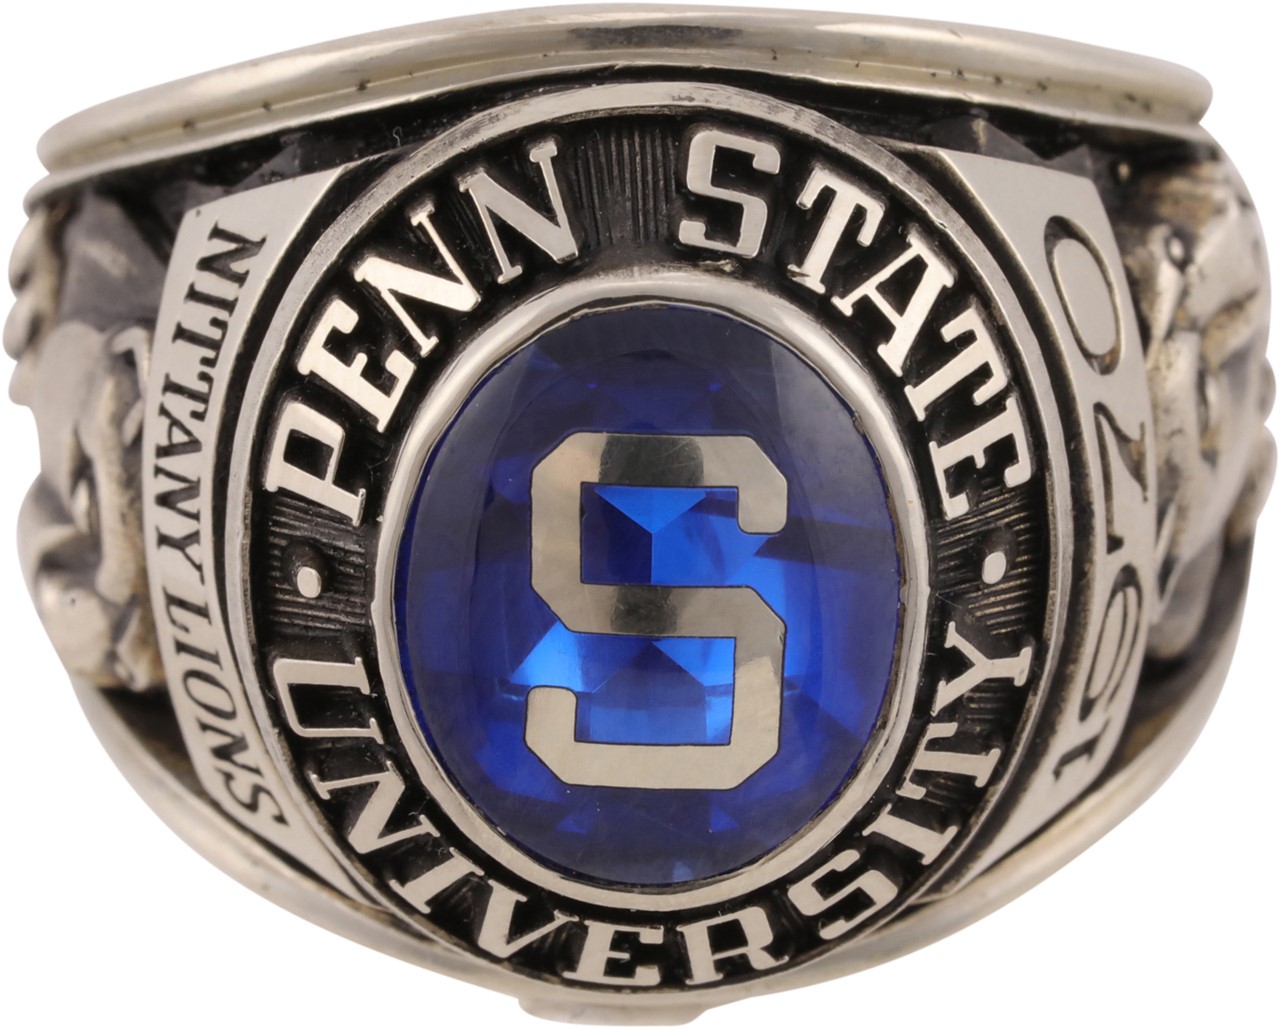 Jack Ham Collection - Jack Ham's 1970 Penn State Class Ring